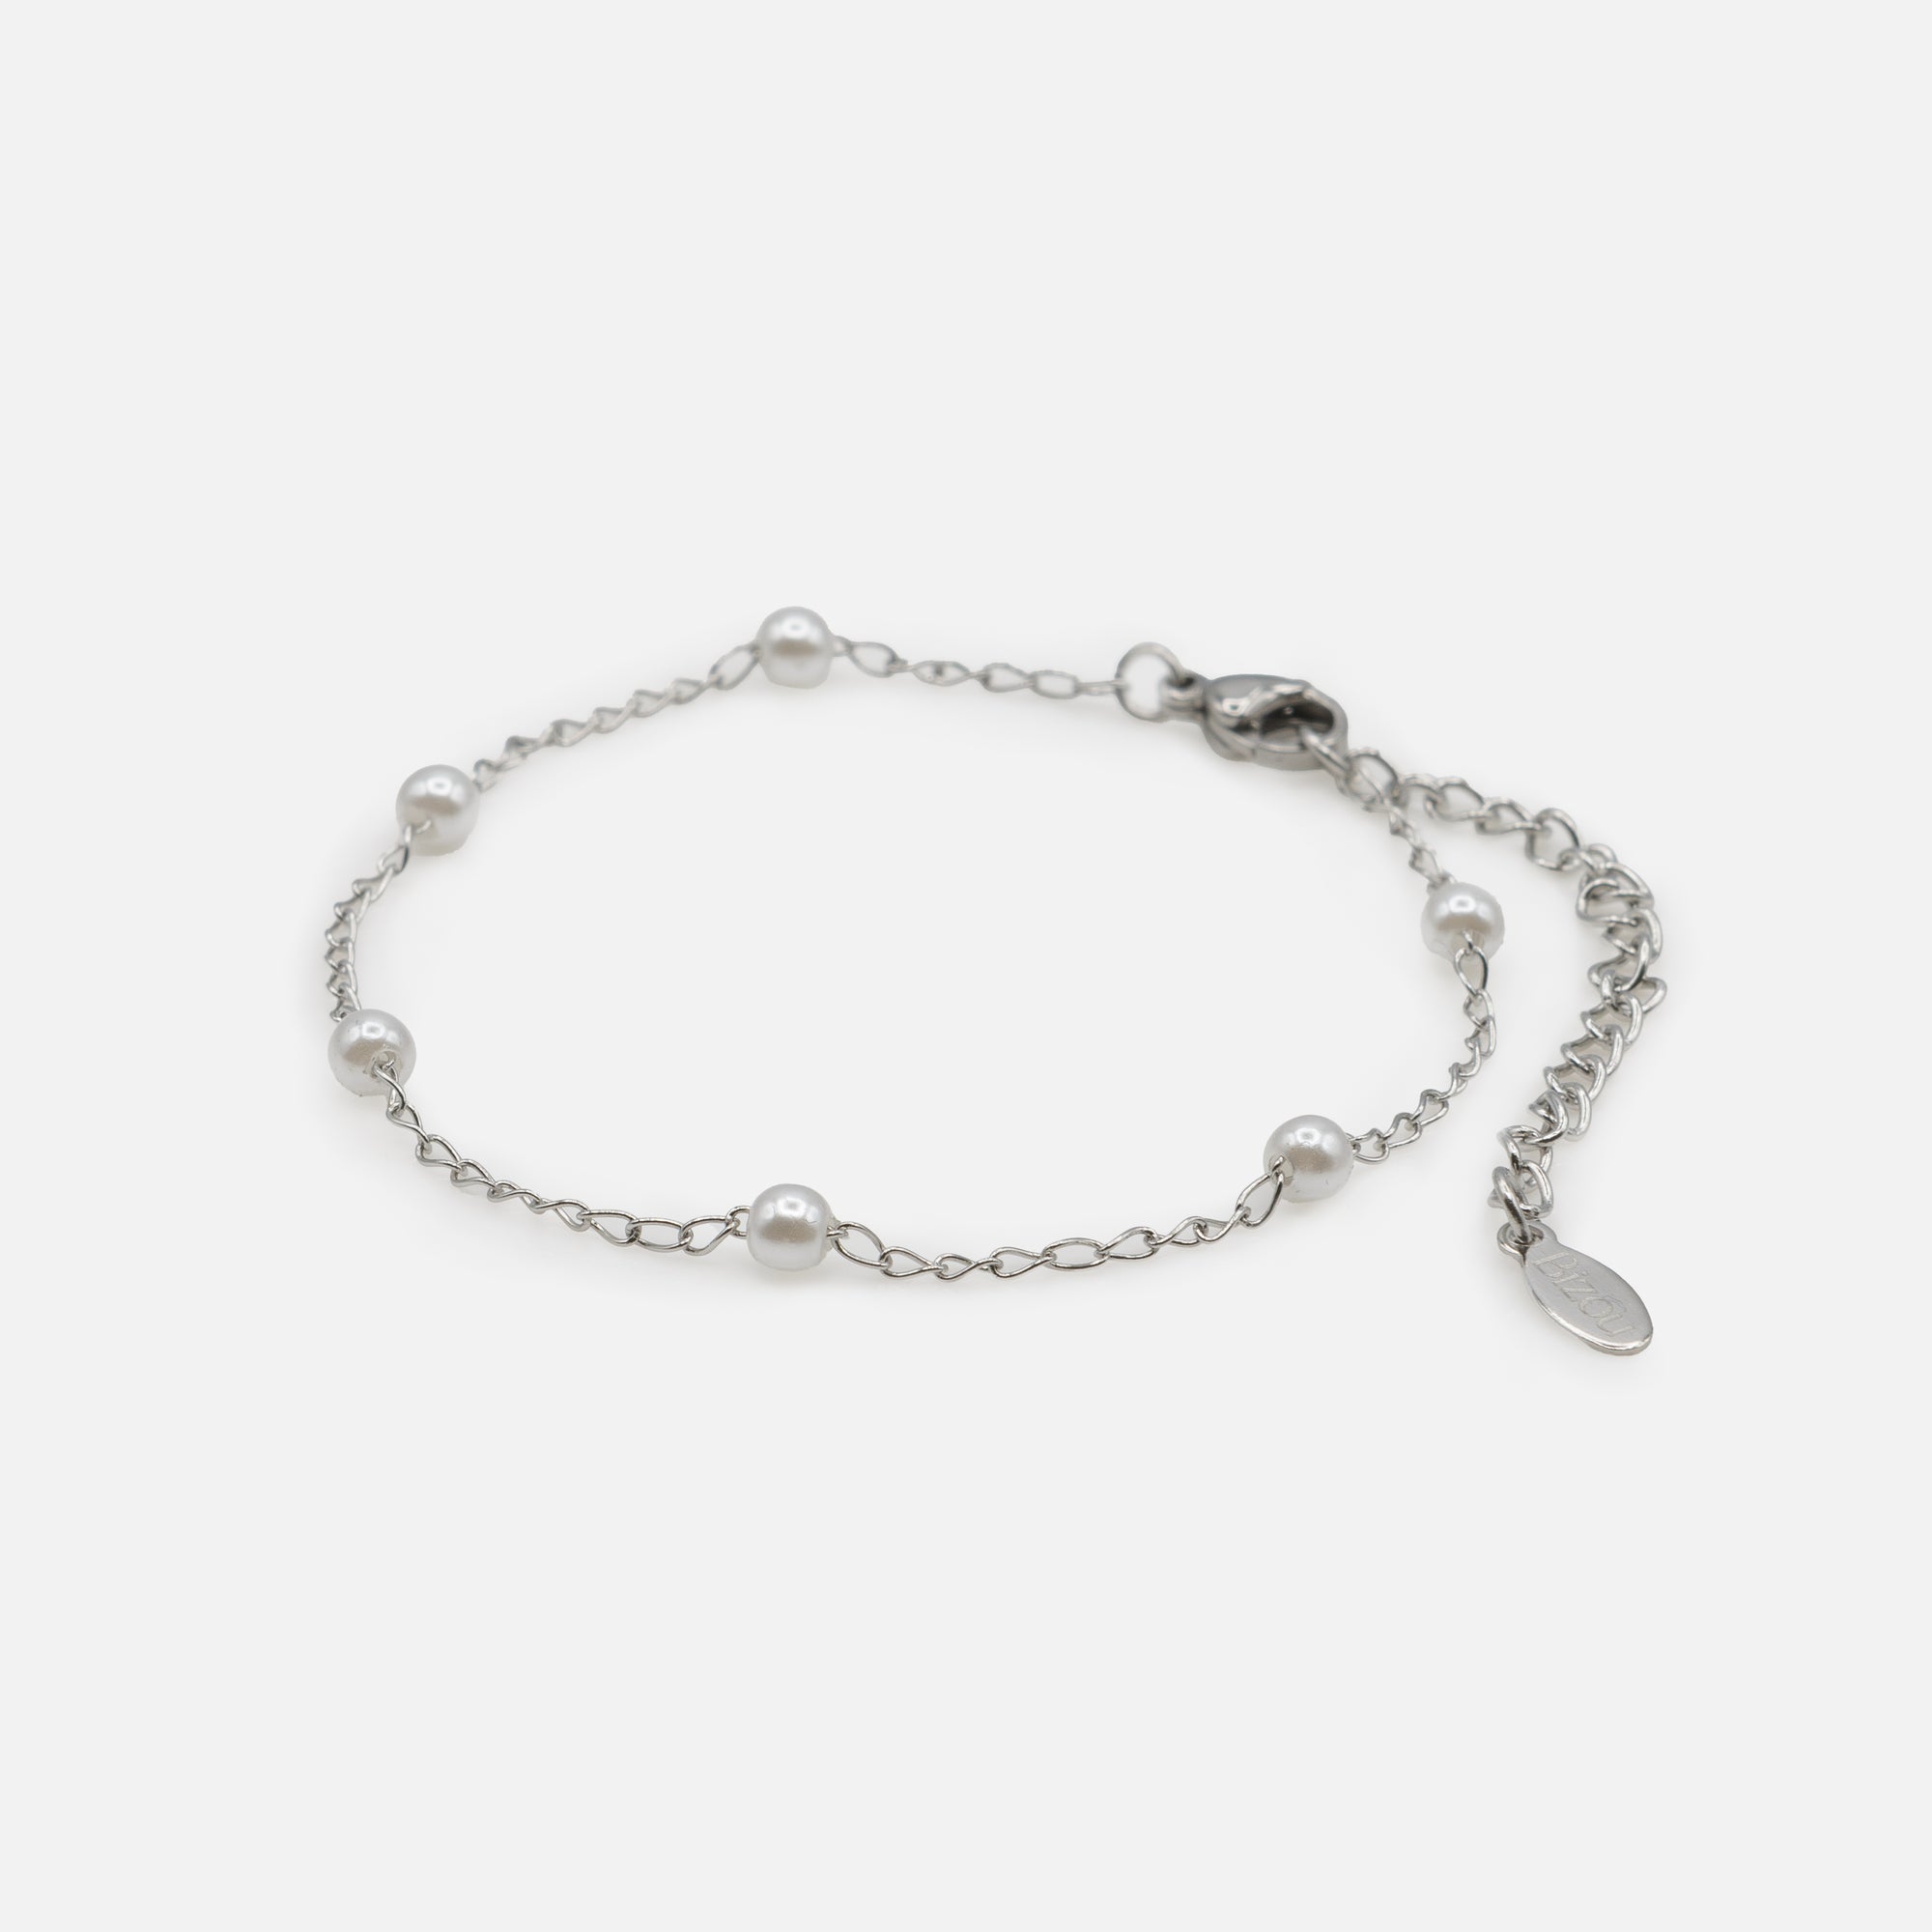 Silver bracelet with small stainless steel beads